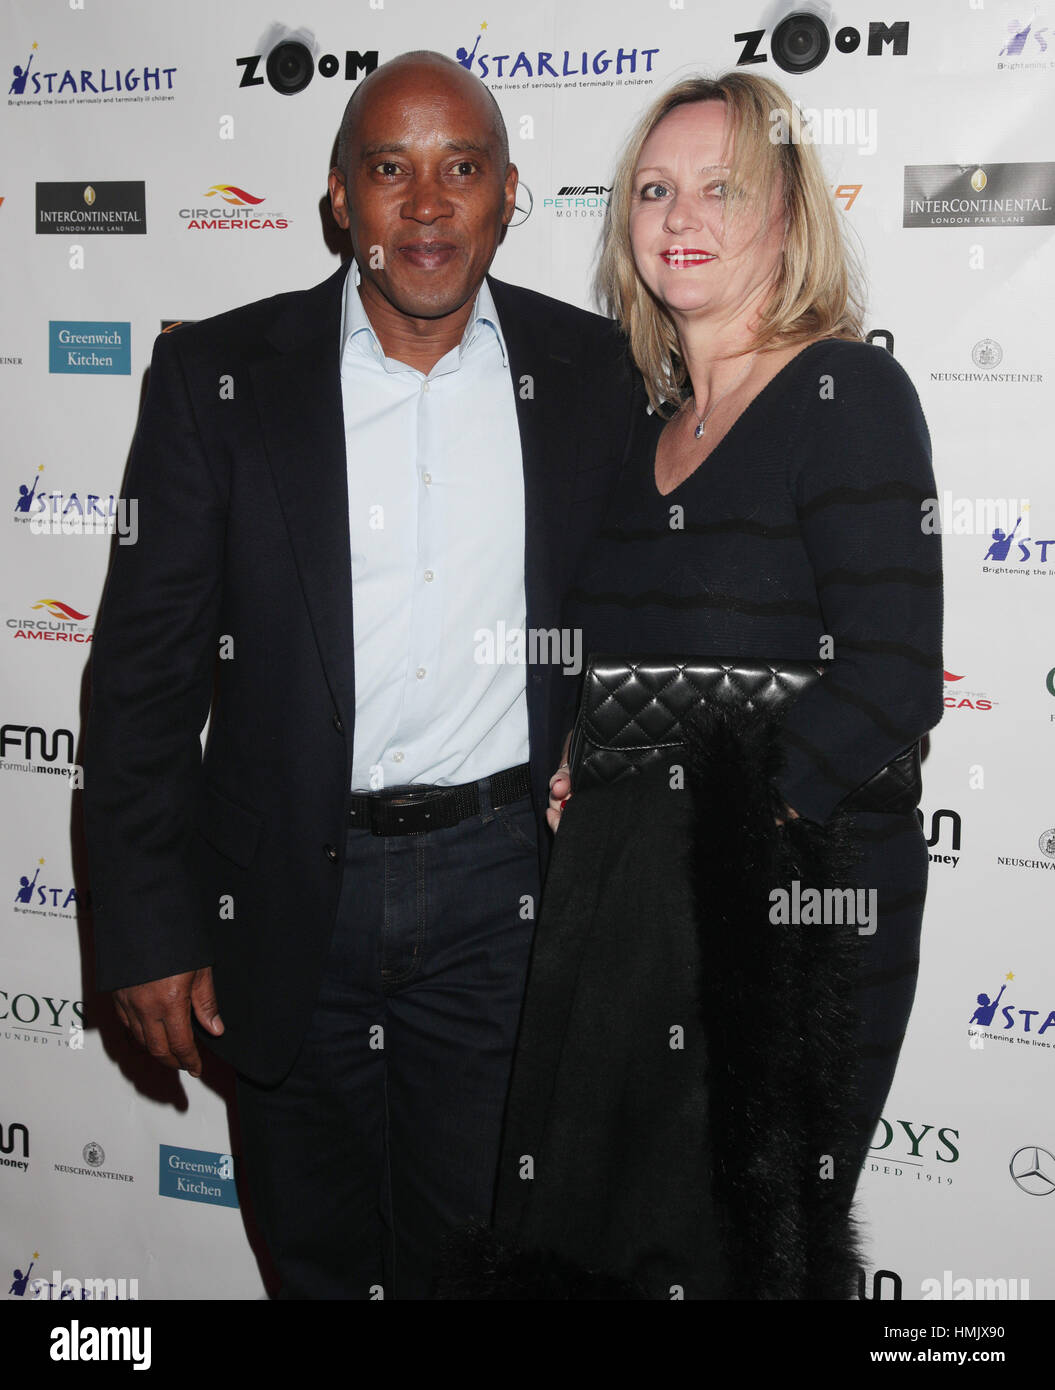 Anthony Hamilton and his wife Linda arriving at the ZOOM F1 charity gala event and auction in aid of Starlight Children's Foundation at the InterContinental London Park Lane. Stock Photo